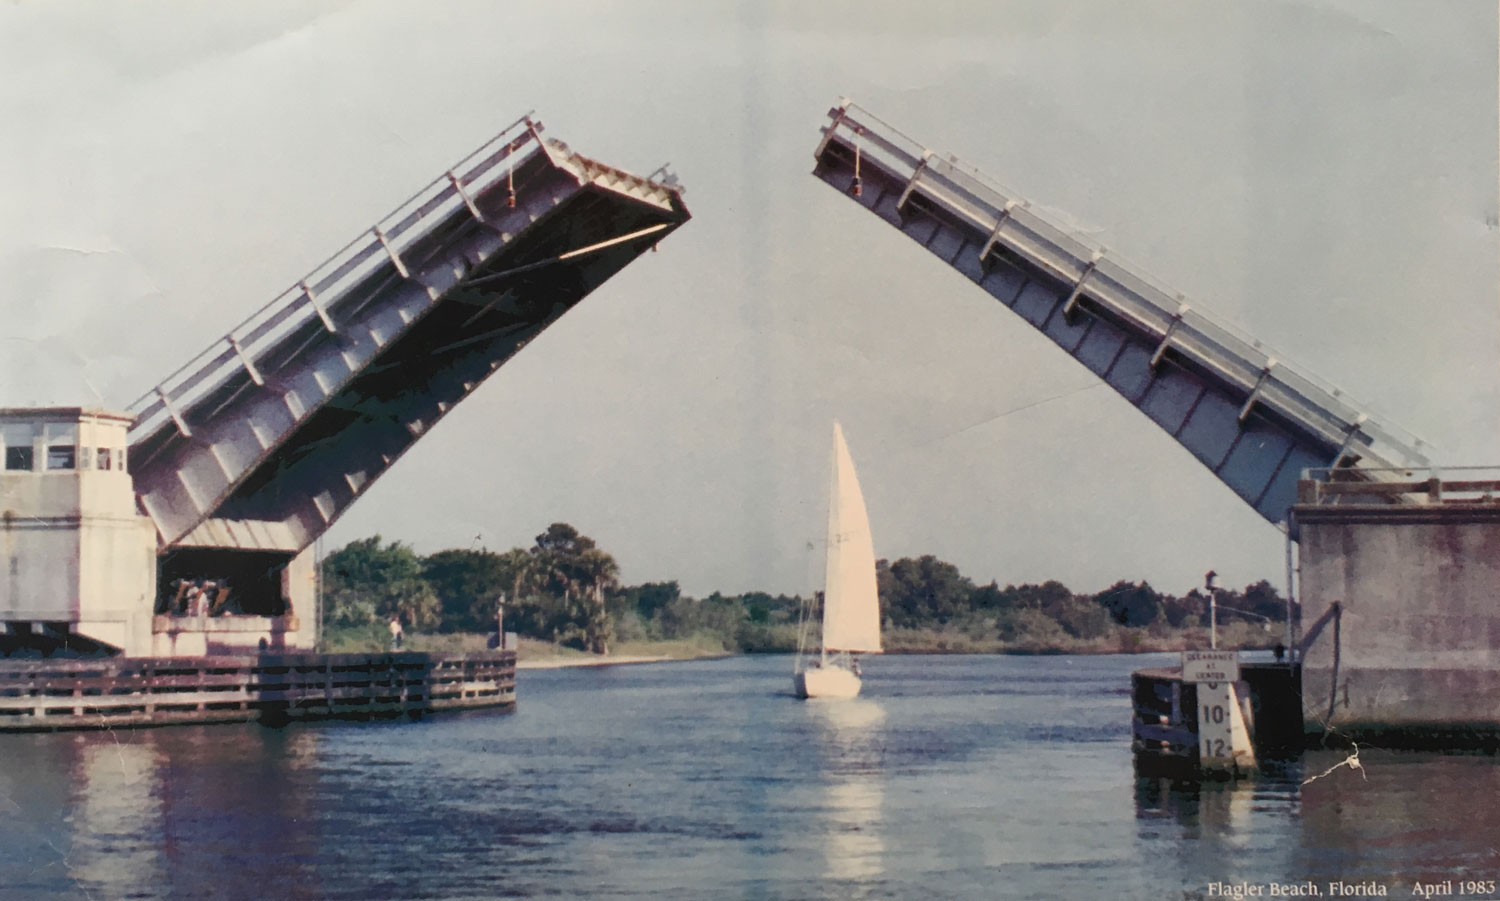 Remember the old Flagler Beach drawbridge? From 1983, courtesy of the Flagler Beach Museum and Commissioner Rick Belhumeur.